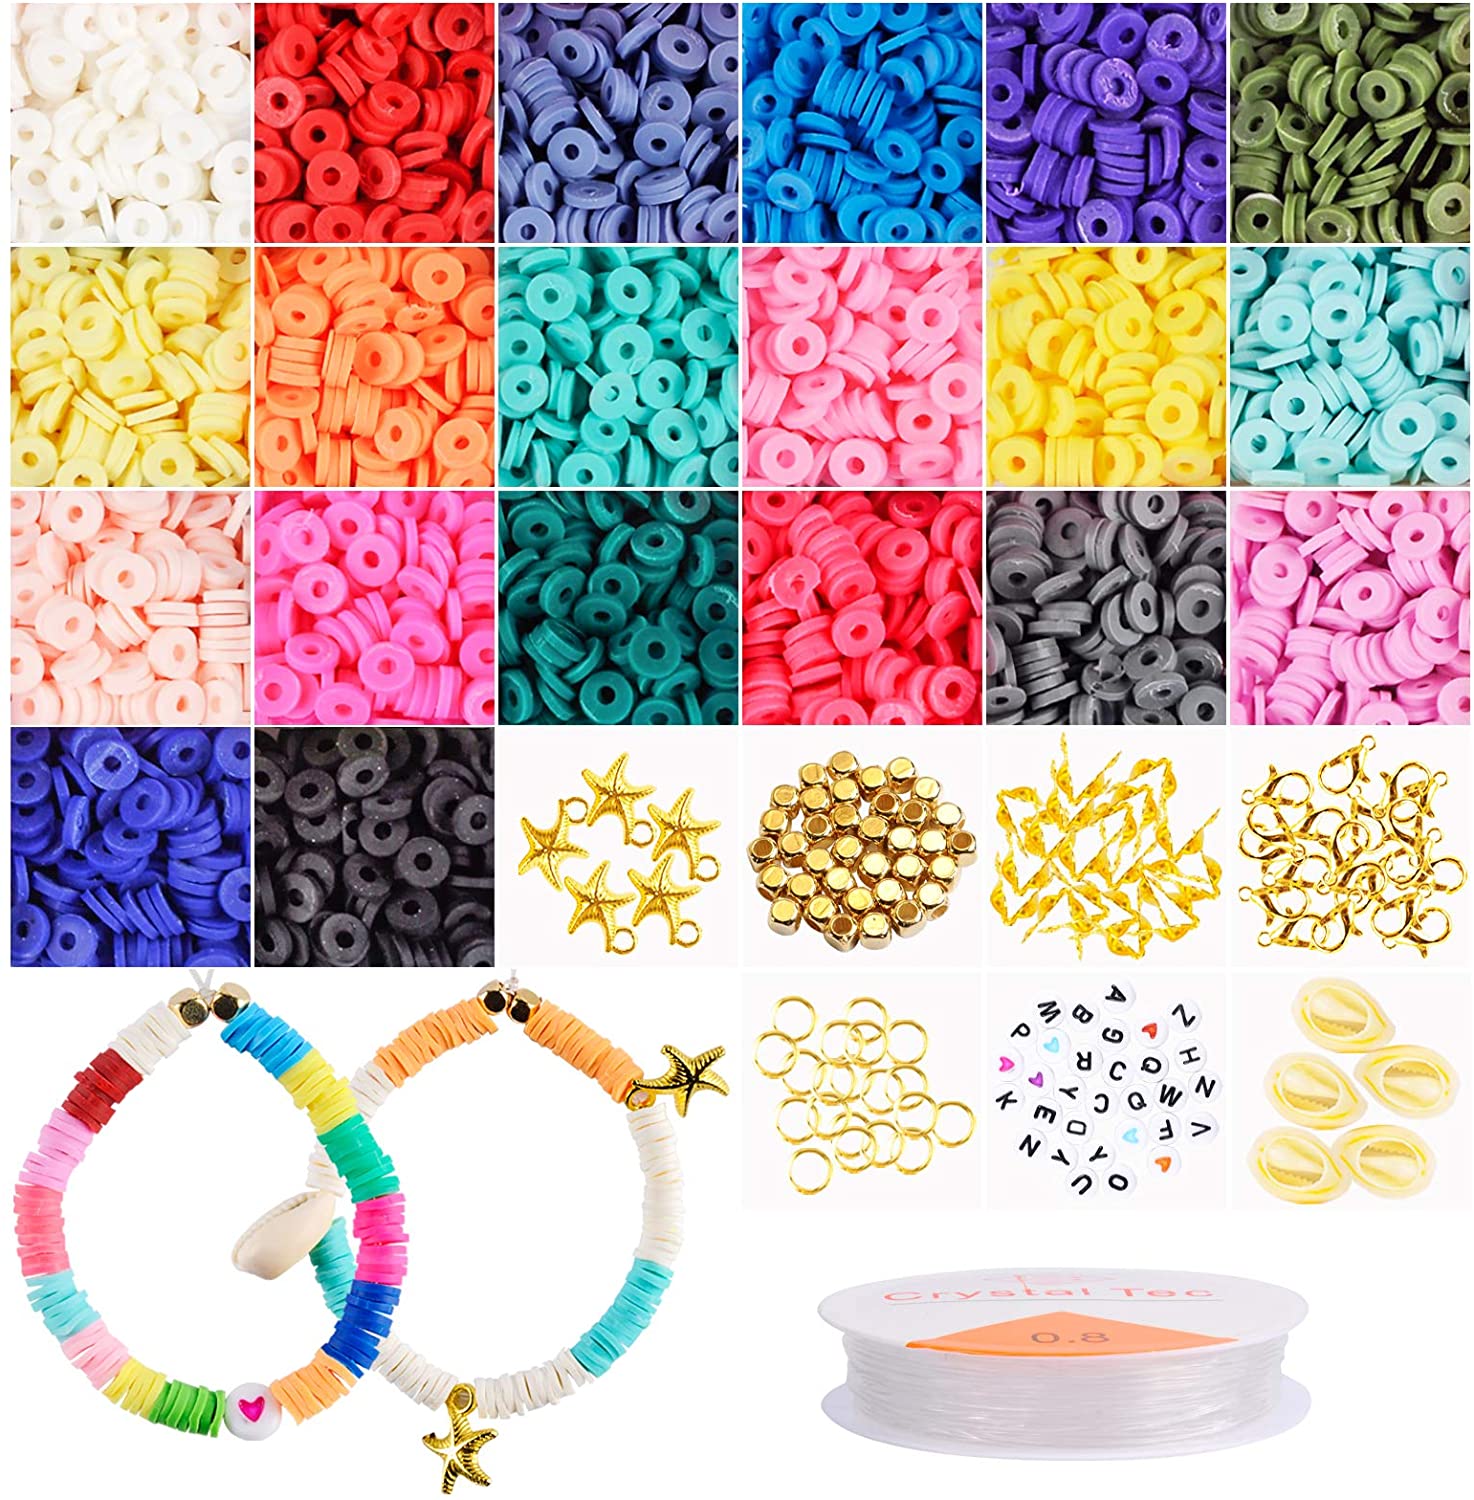 Suhome 5000 Pcs 20 Colors 6mm Flat Round Polymer Clay Spacer Beads for Jewelry Making, Handmade Loose Spacer Beads, Bracelets Necklace Earring DIY